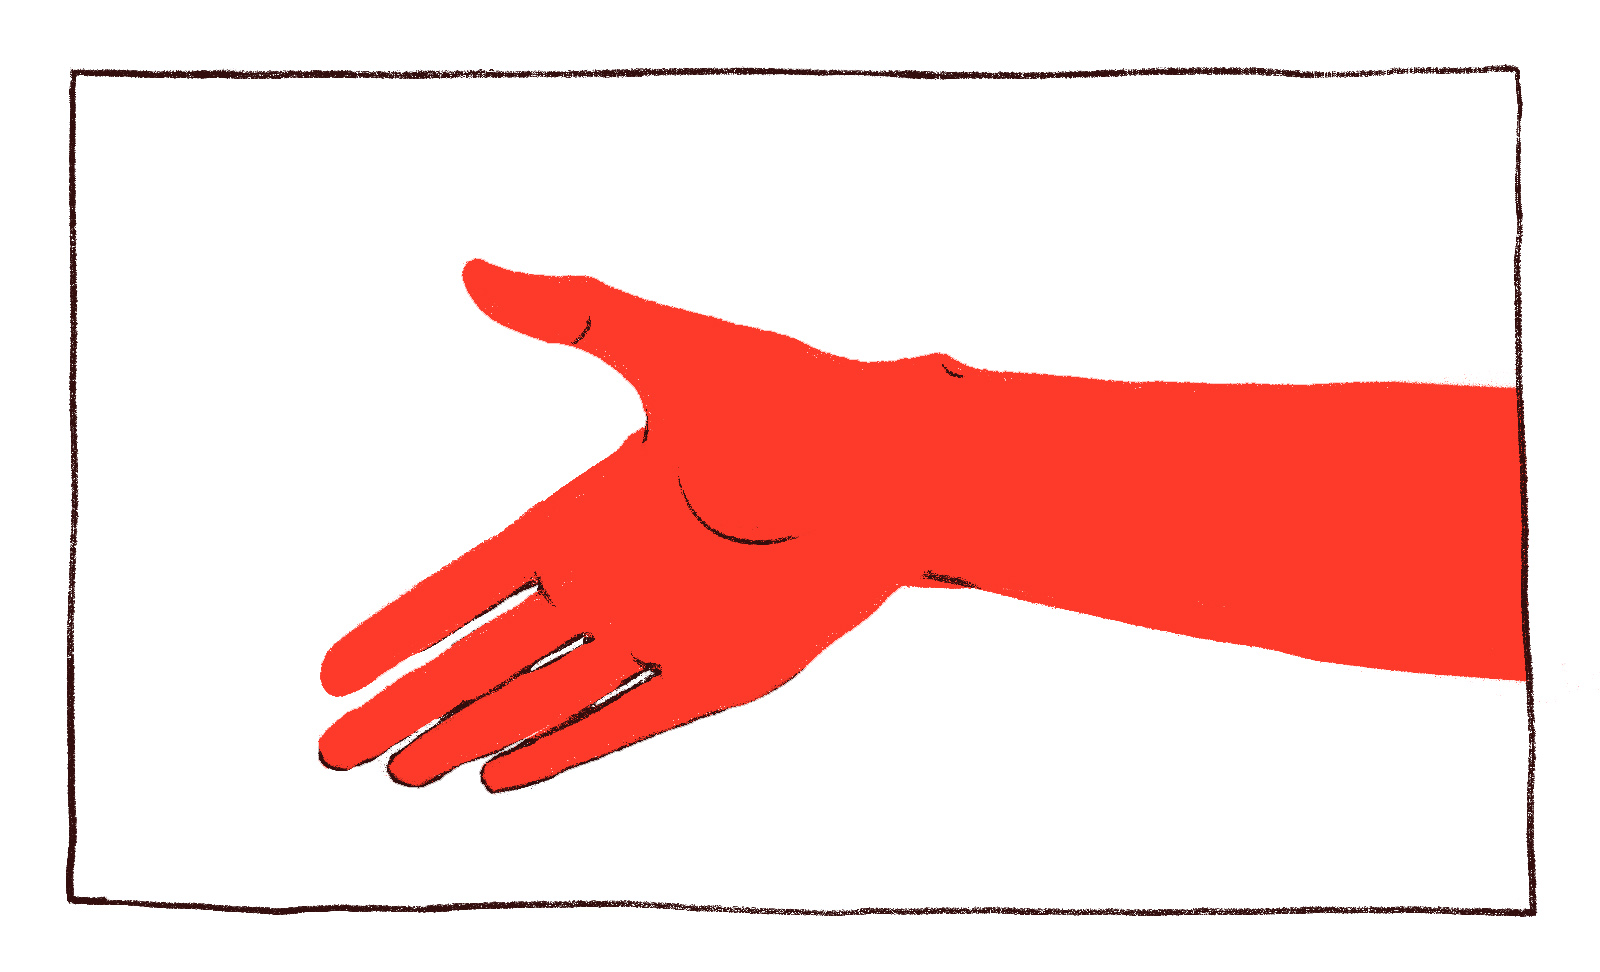 How To Warmly Greet People Without Having To Touch Them